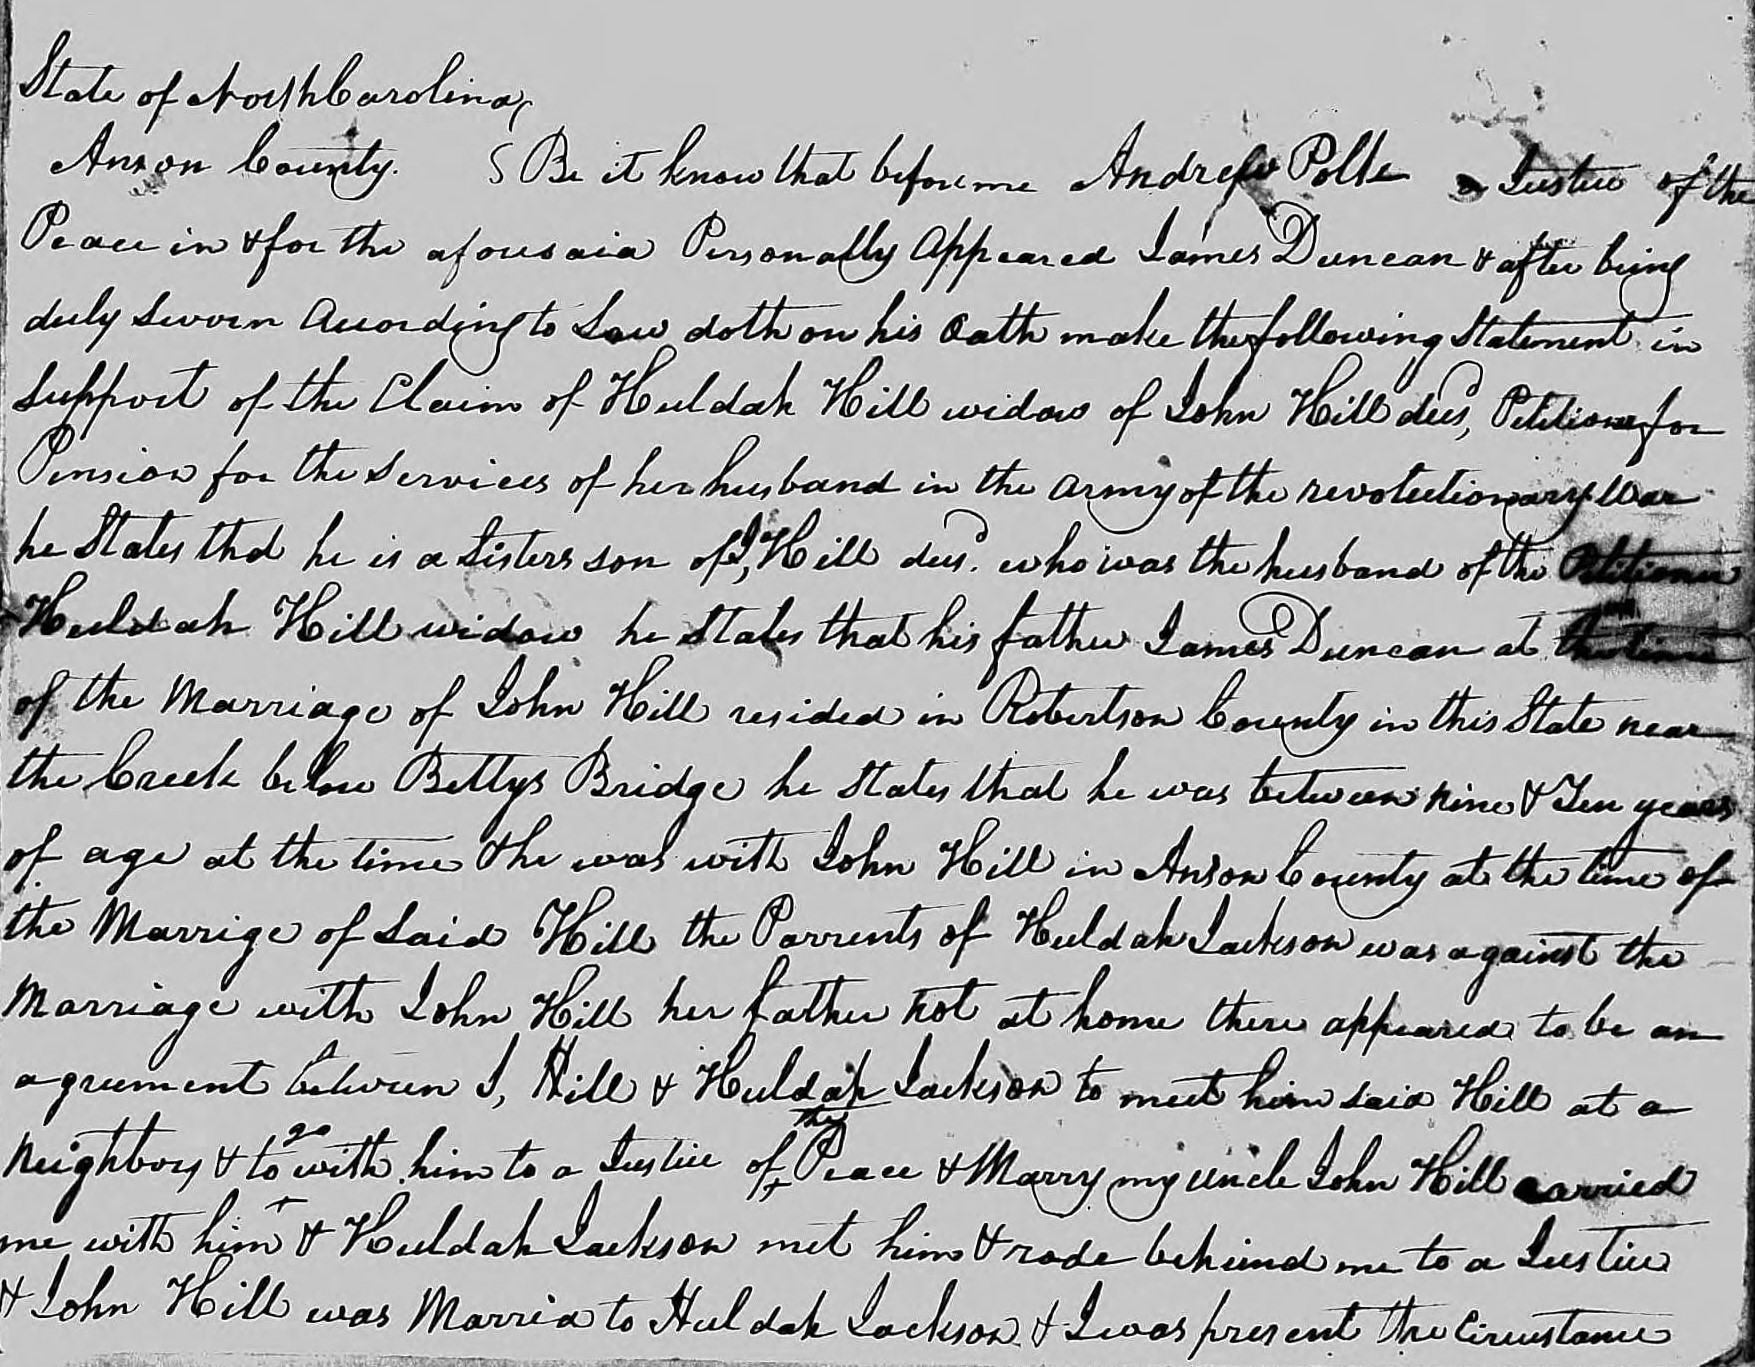 Affidavit of James Duncan in support of a Pension Claim for Huldah Hill, 30 July 1838, page 1